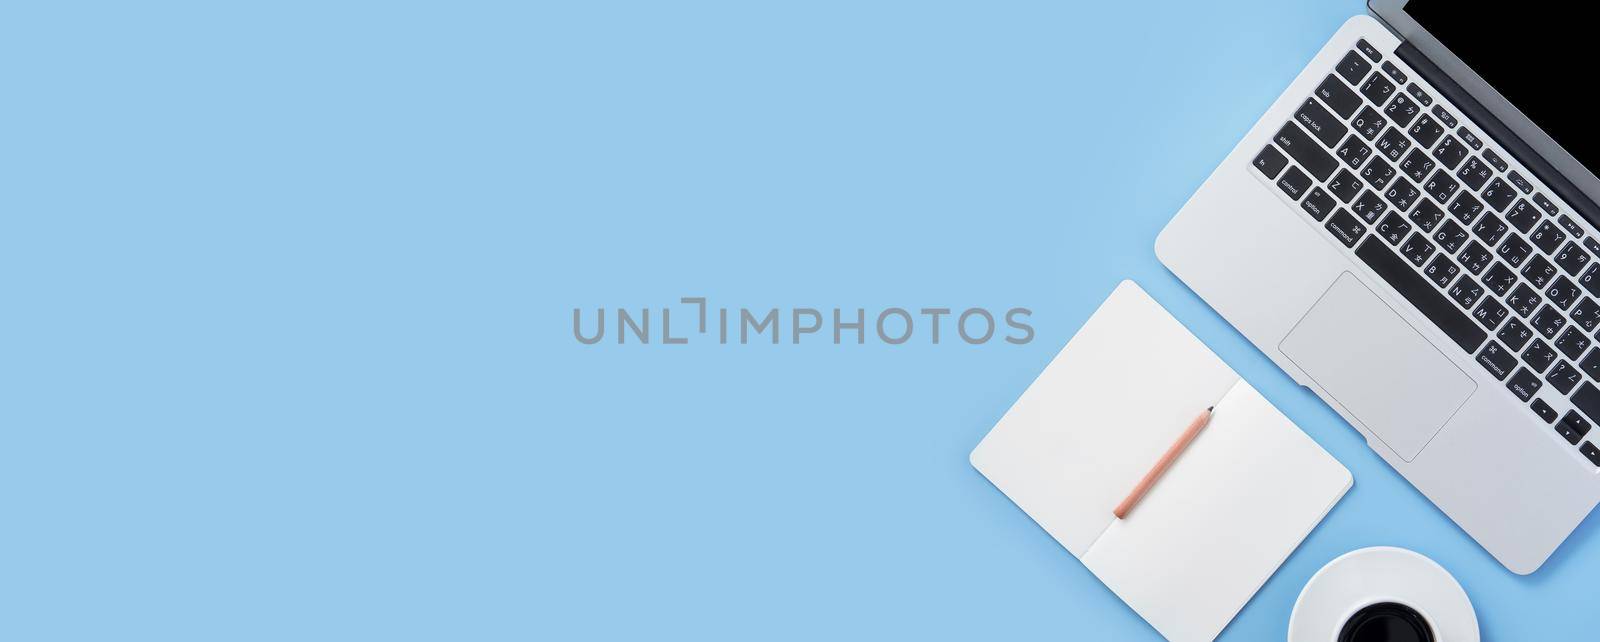 Girl write on open white book or accounting on a minimal clean light blue desk with laptop and accessories, copy space, flat lay, top view, mock up